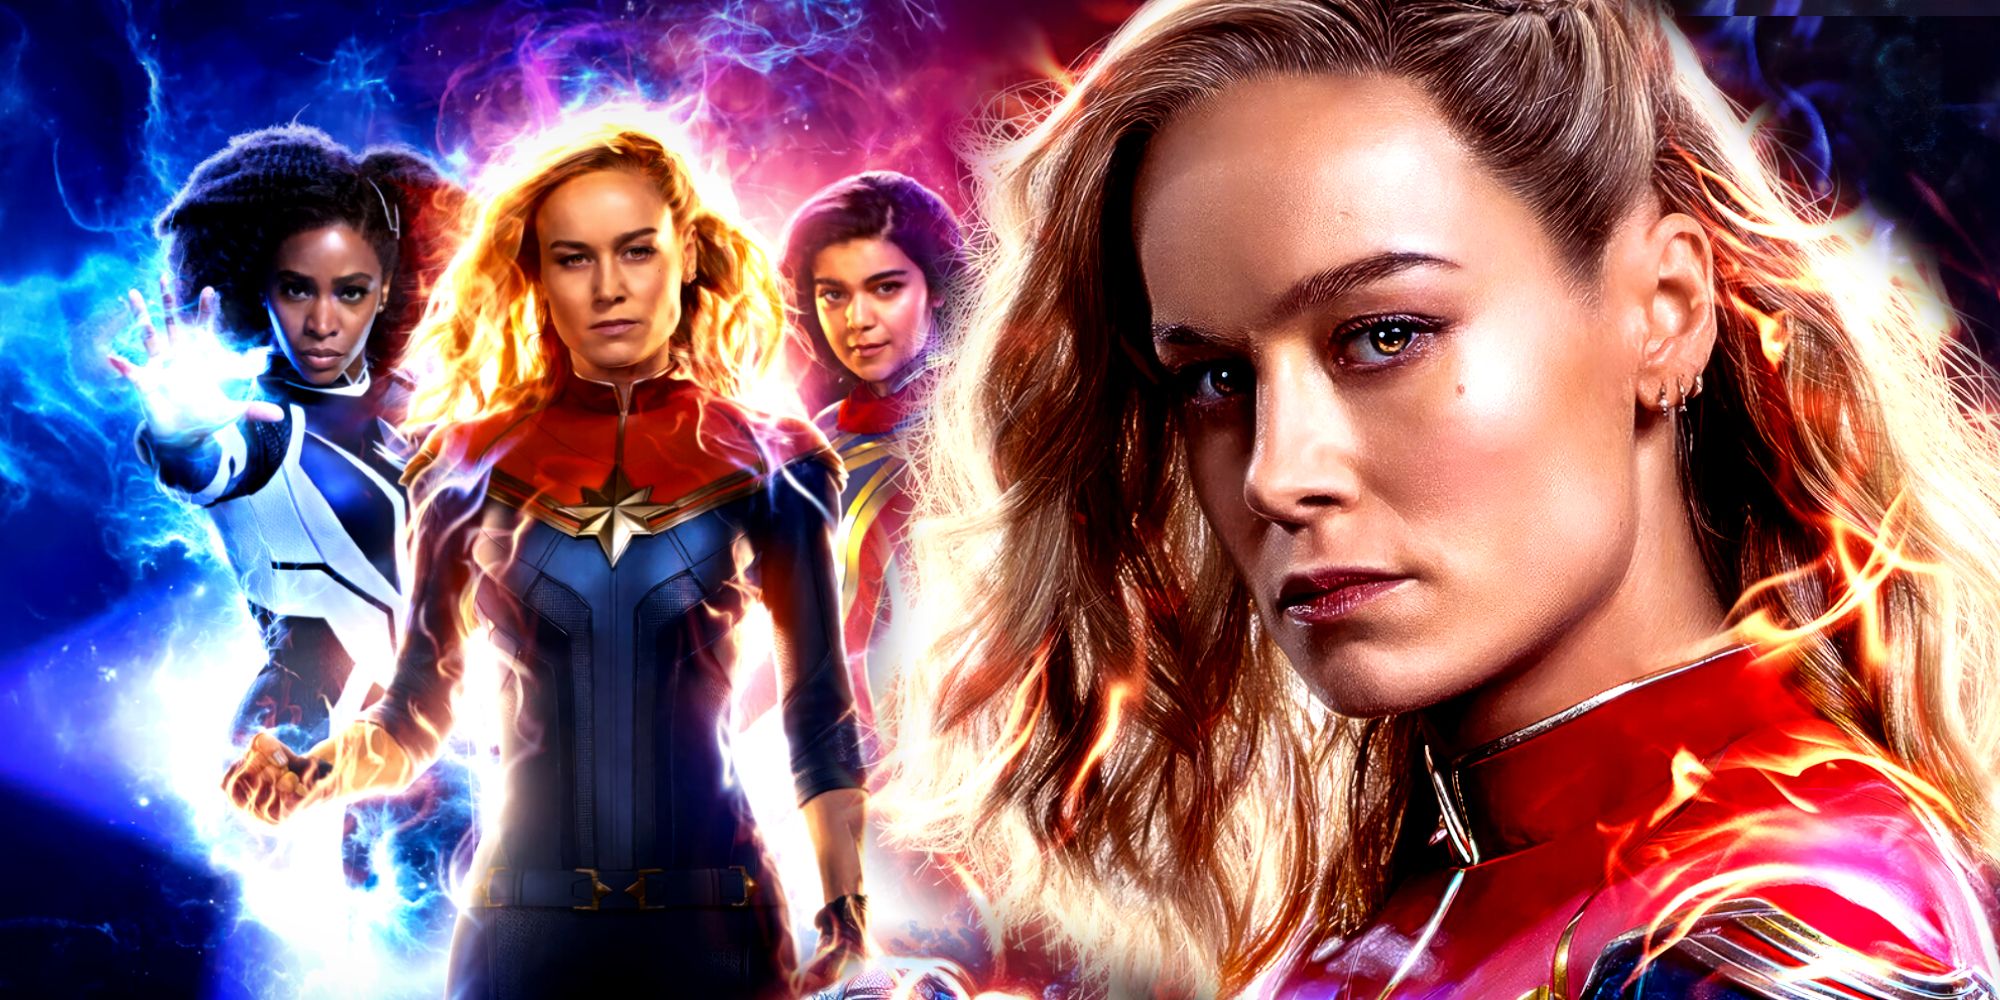 Brie Larson as Carol Danvers poses in front of Monica Rambeau and Kamala Khan in The Marvels